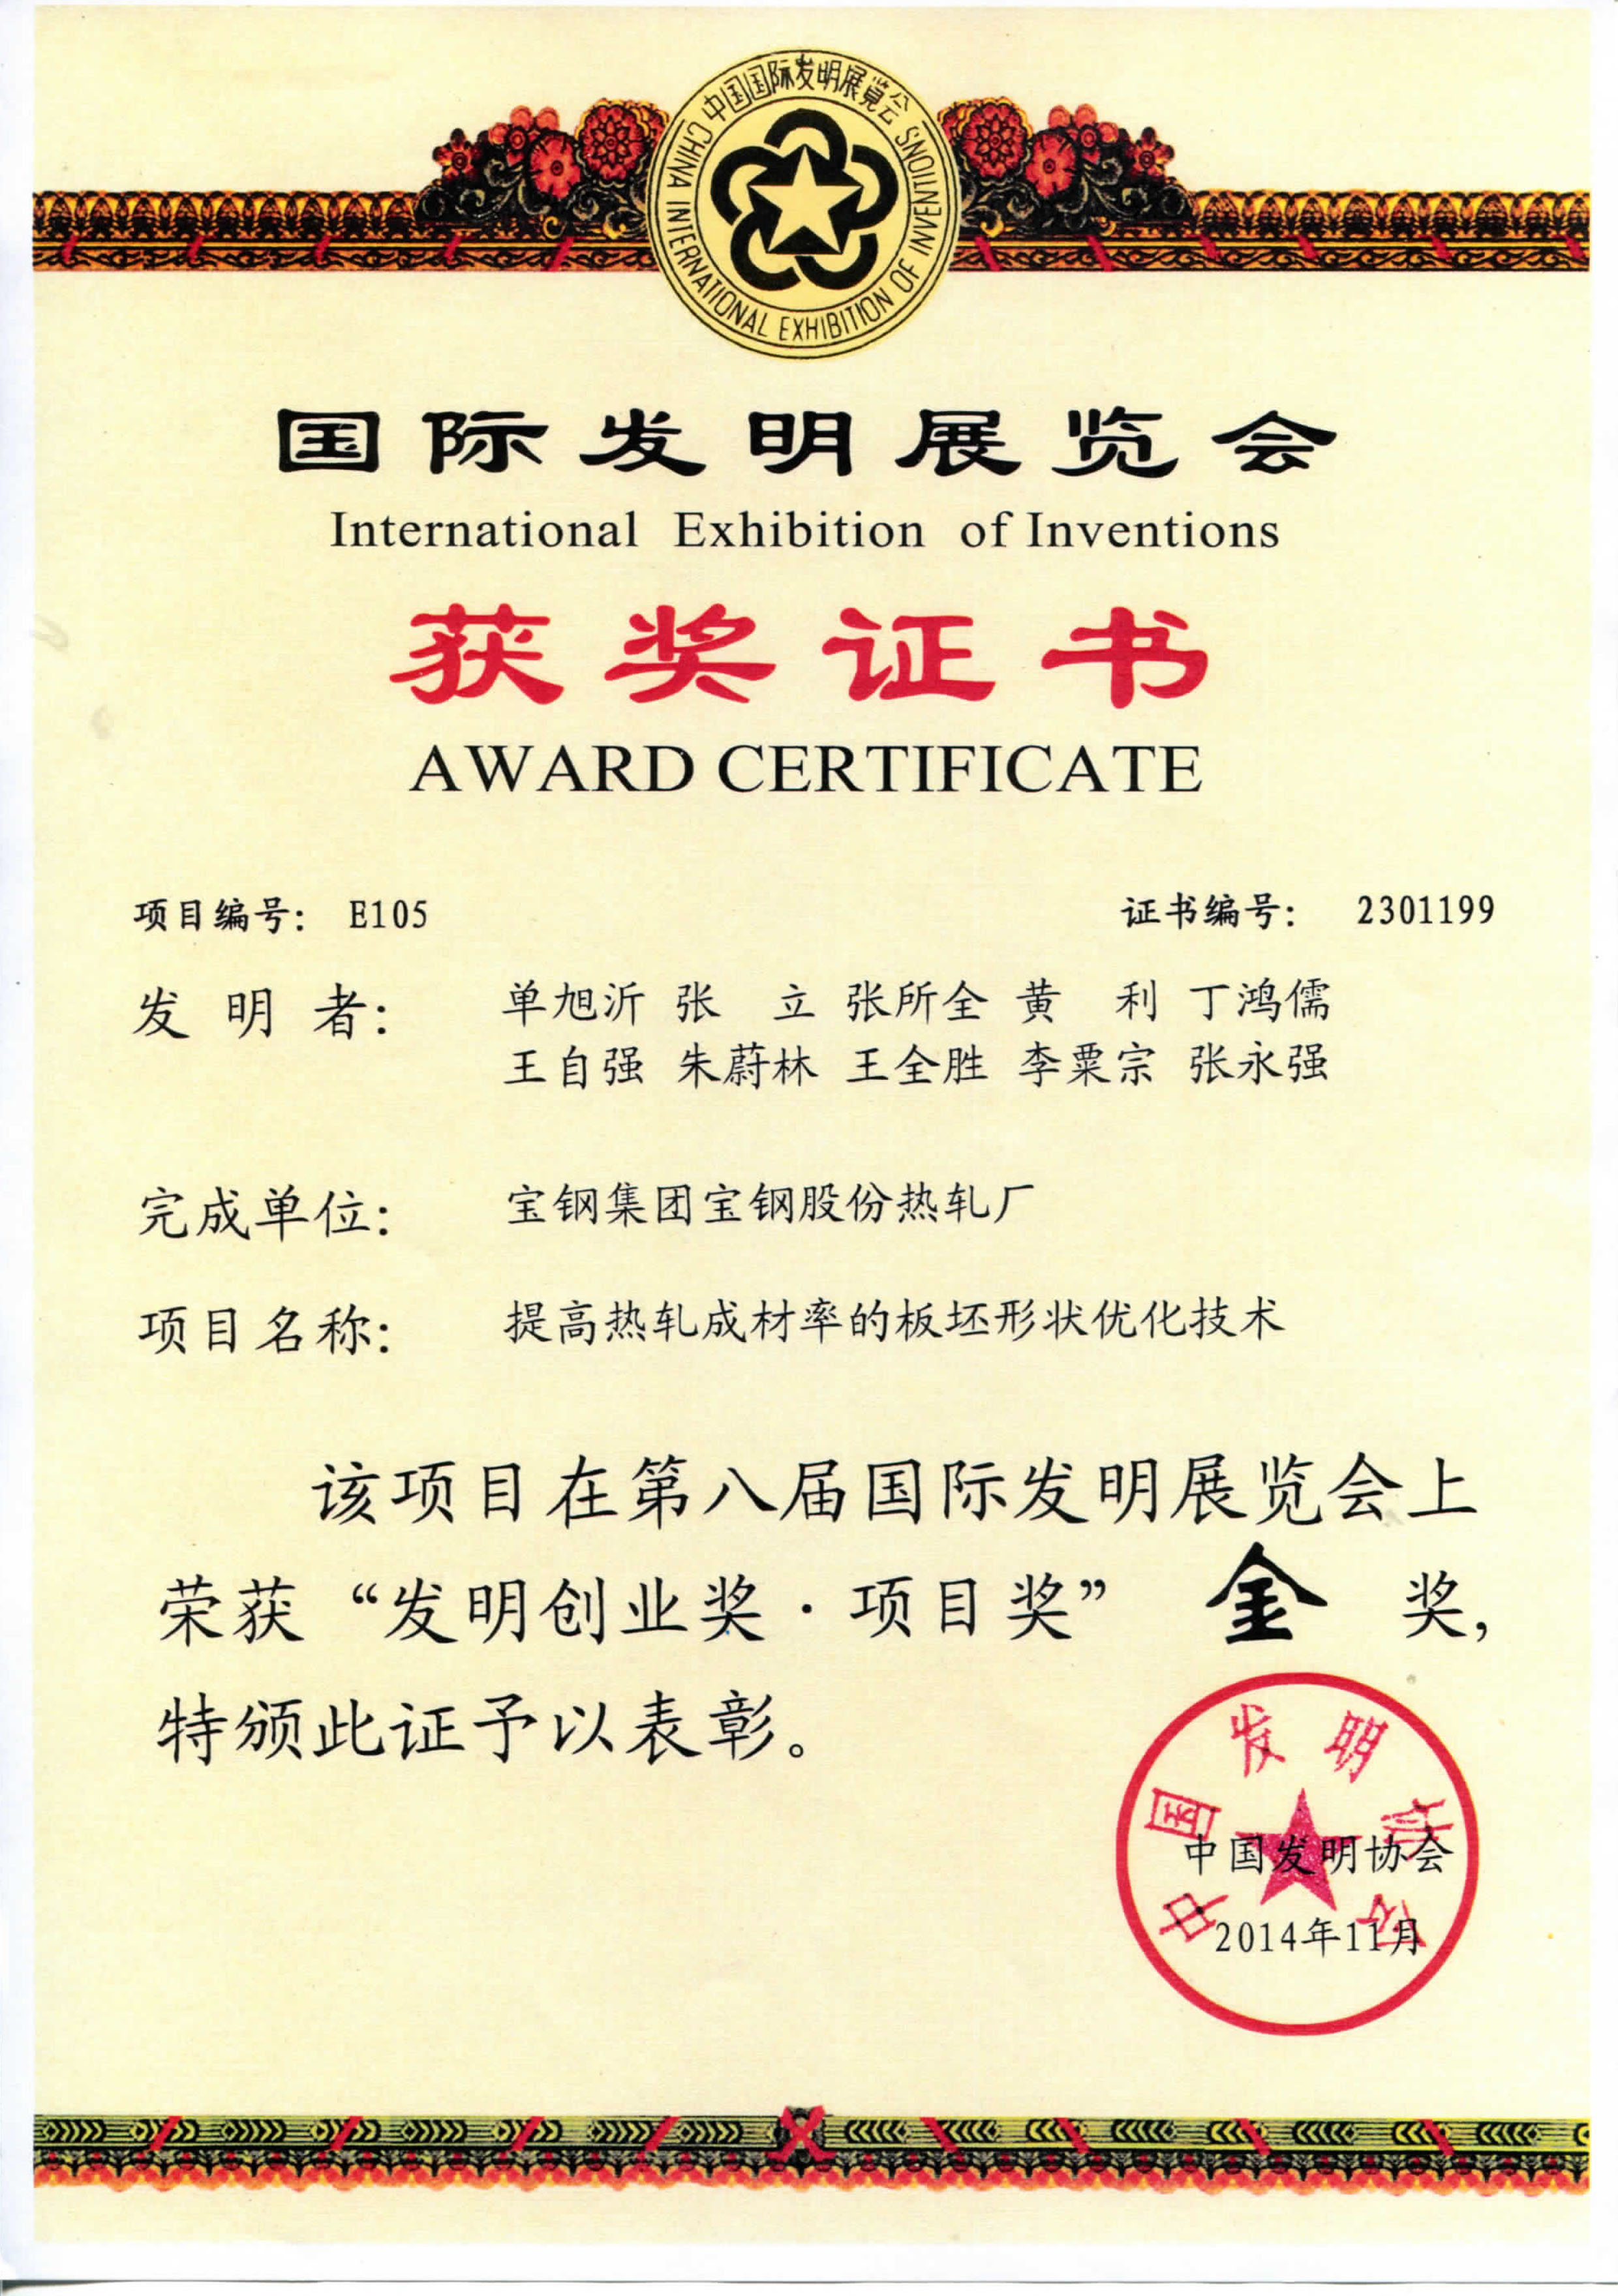 Certificate of Award for International Invention Exhibition